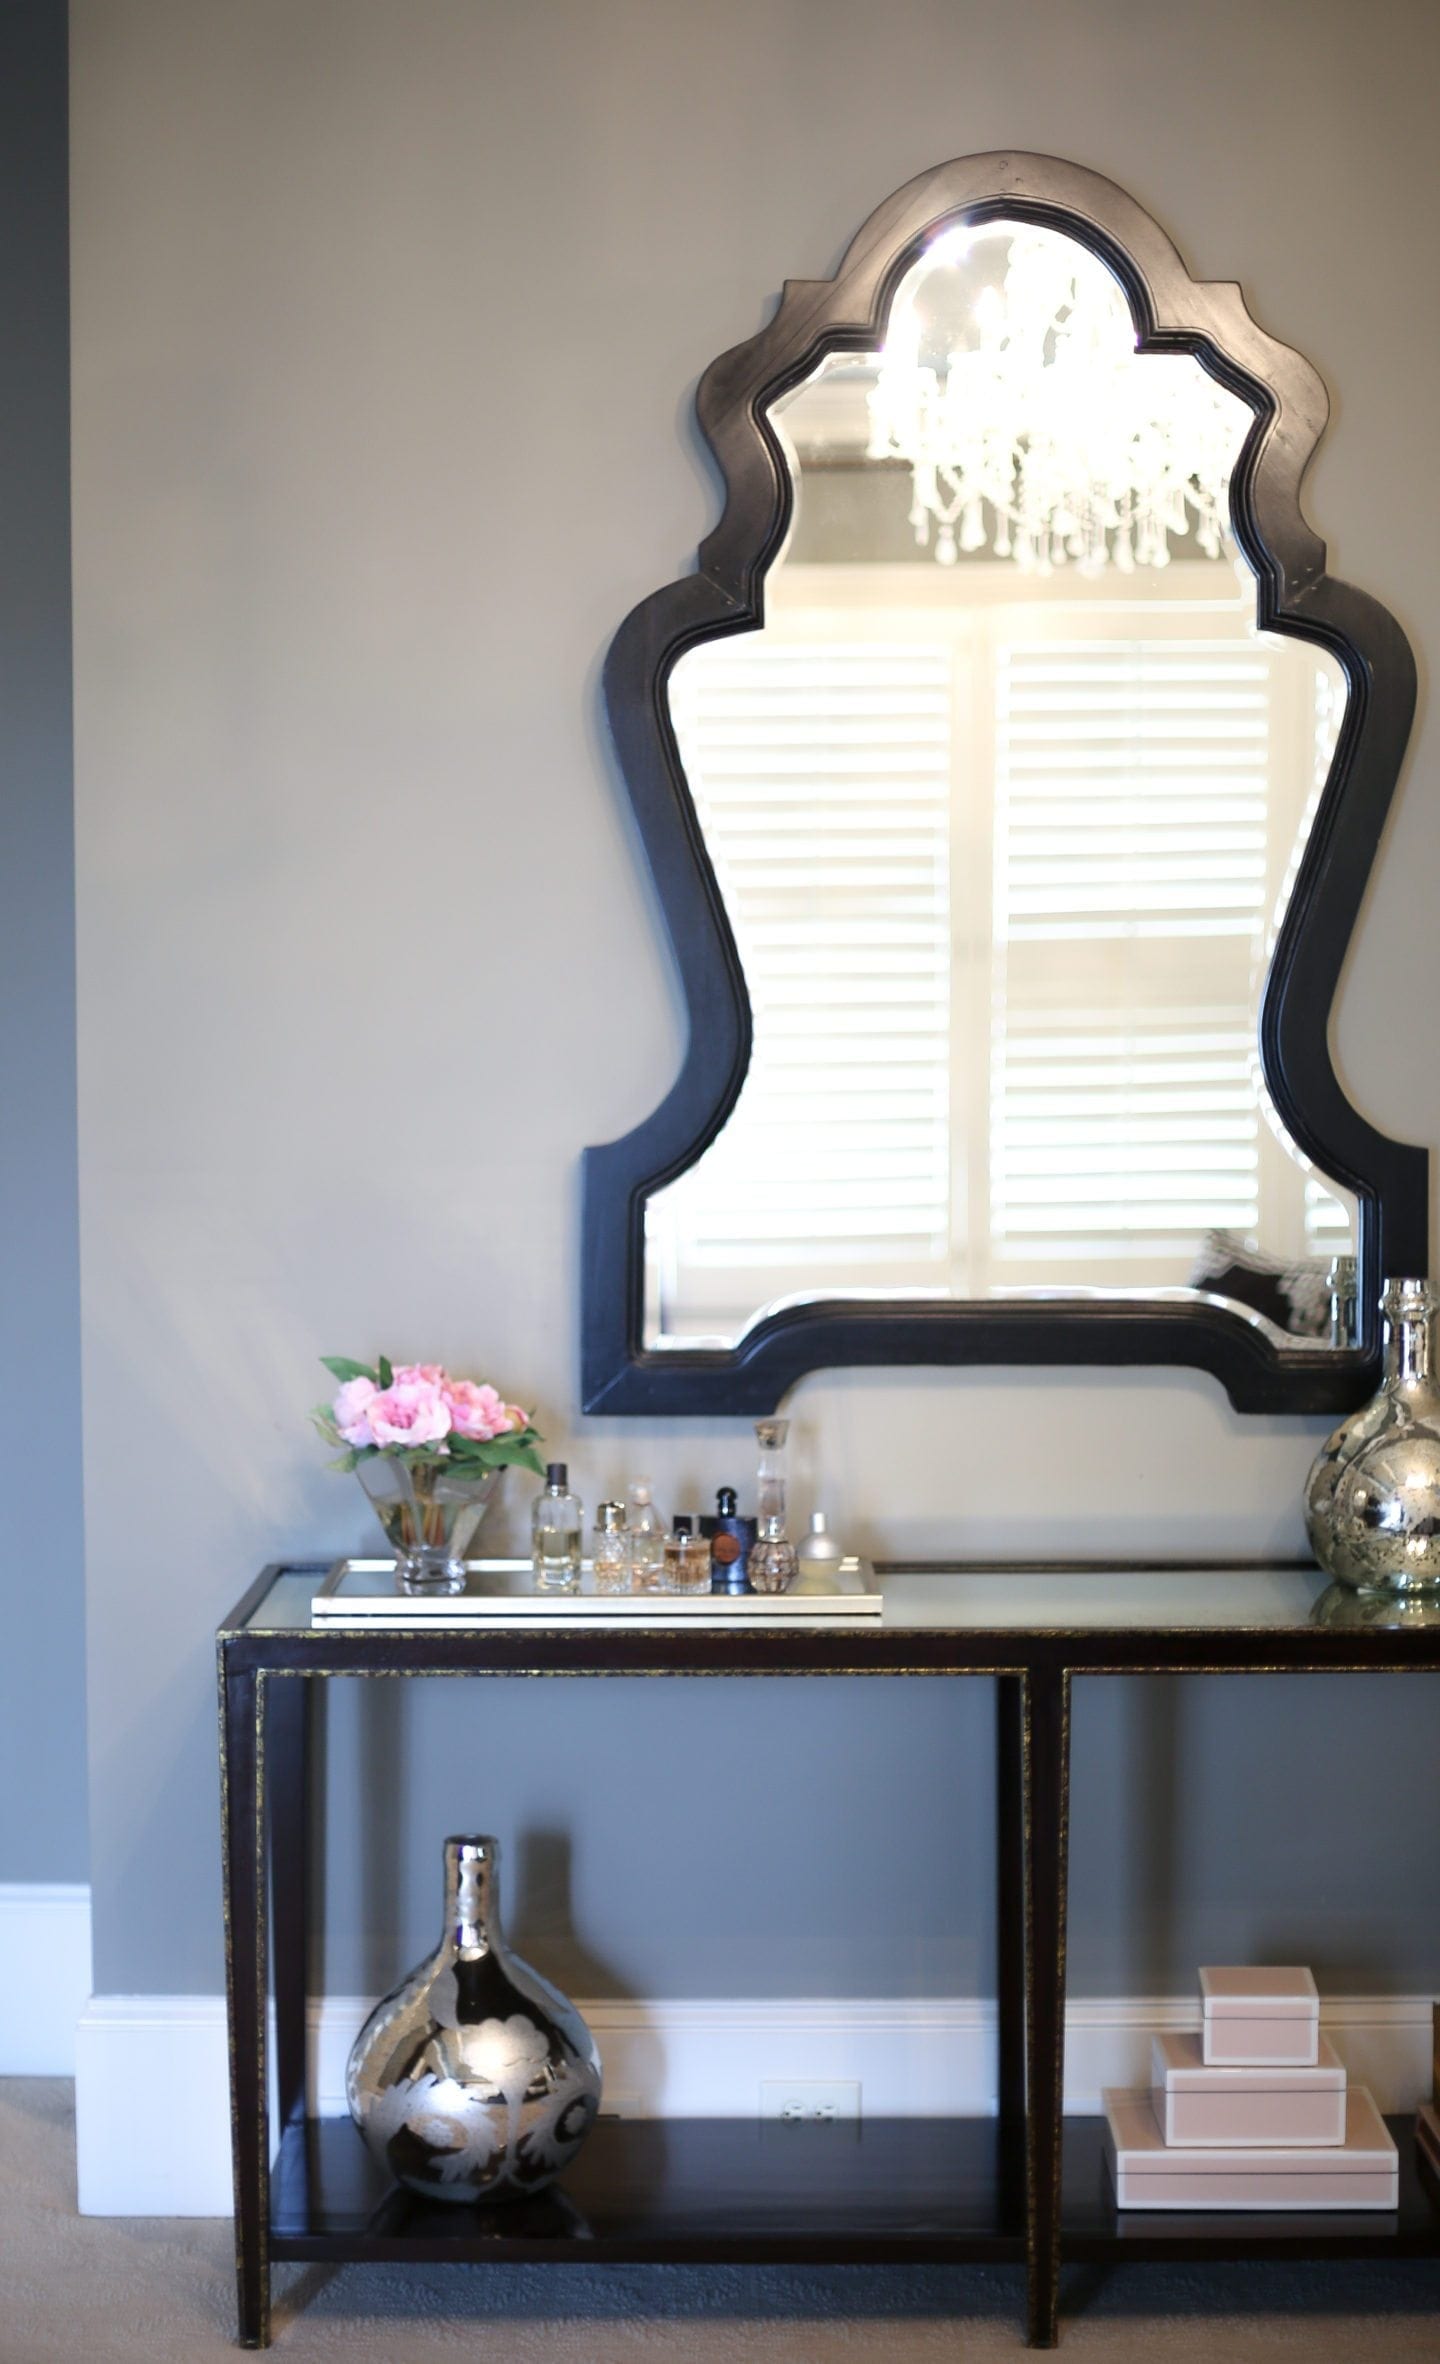 Benjamin Moore dark gray paint on the walls of a bedroom decorated in gray, gold and black. Oversized large black framed mirror. 